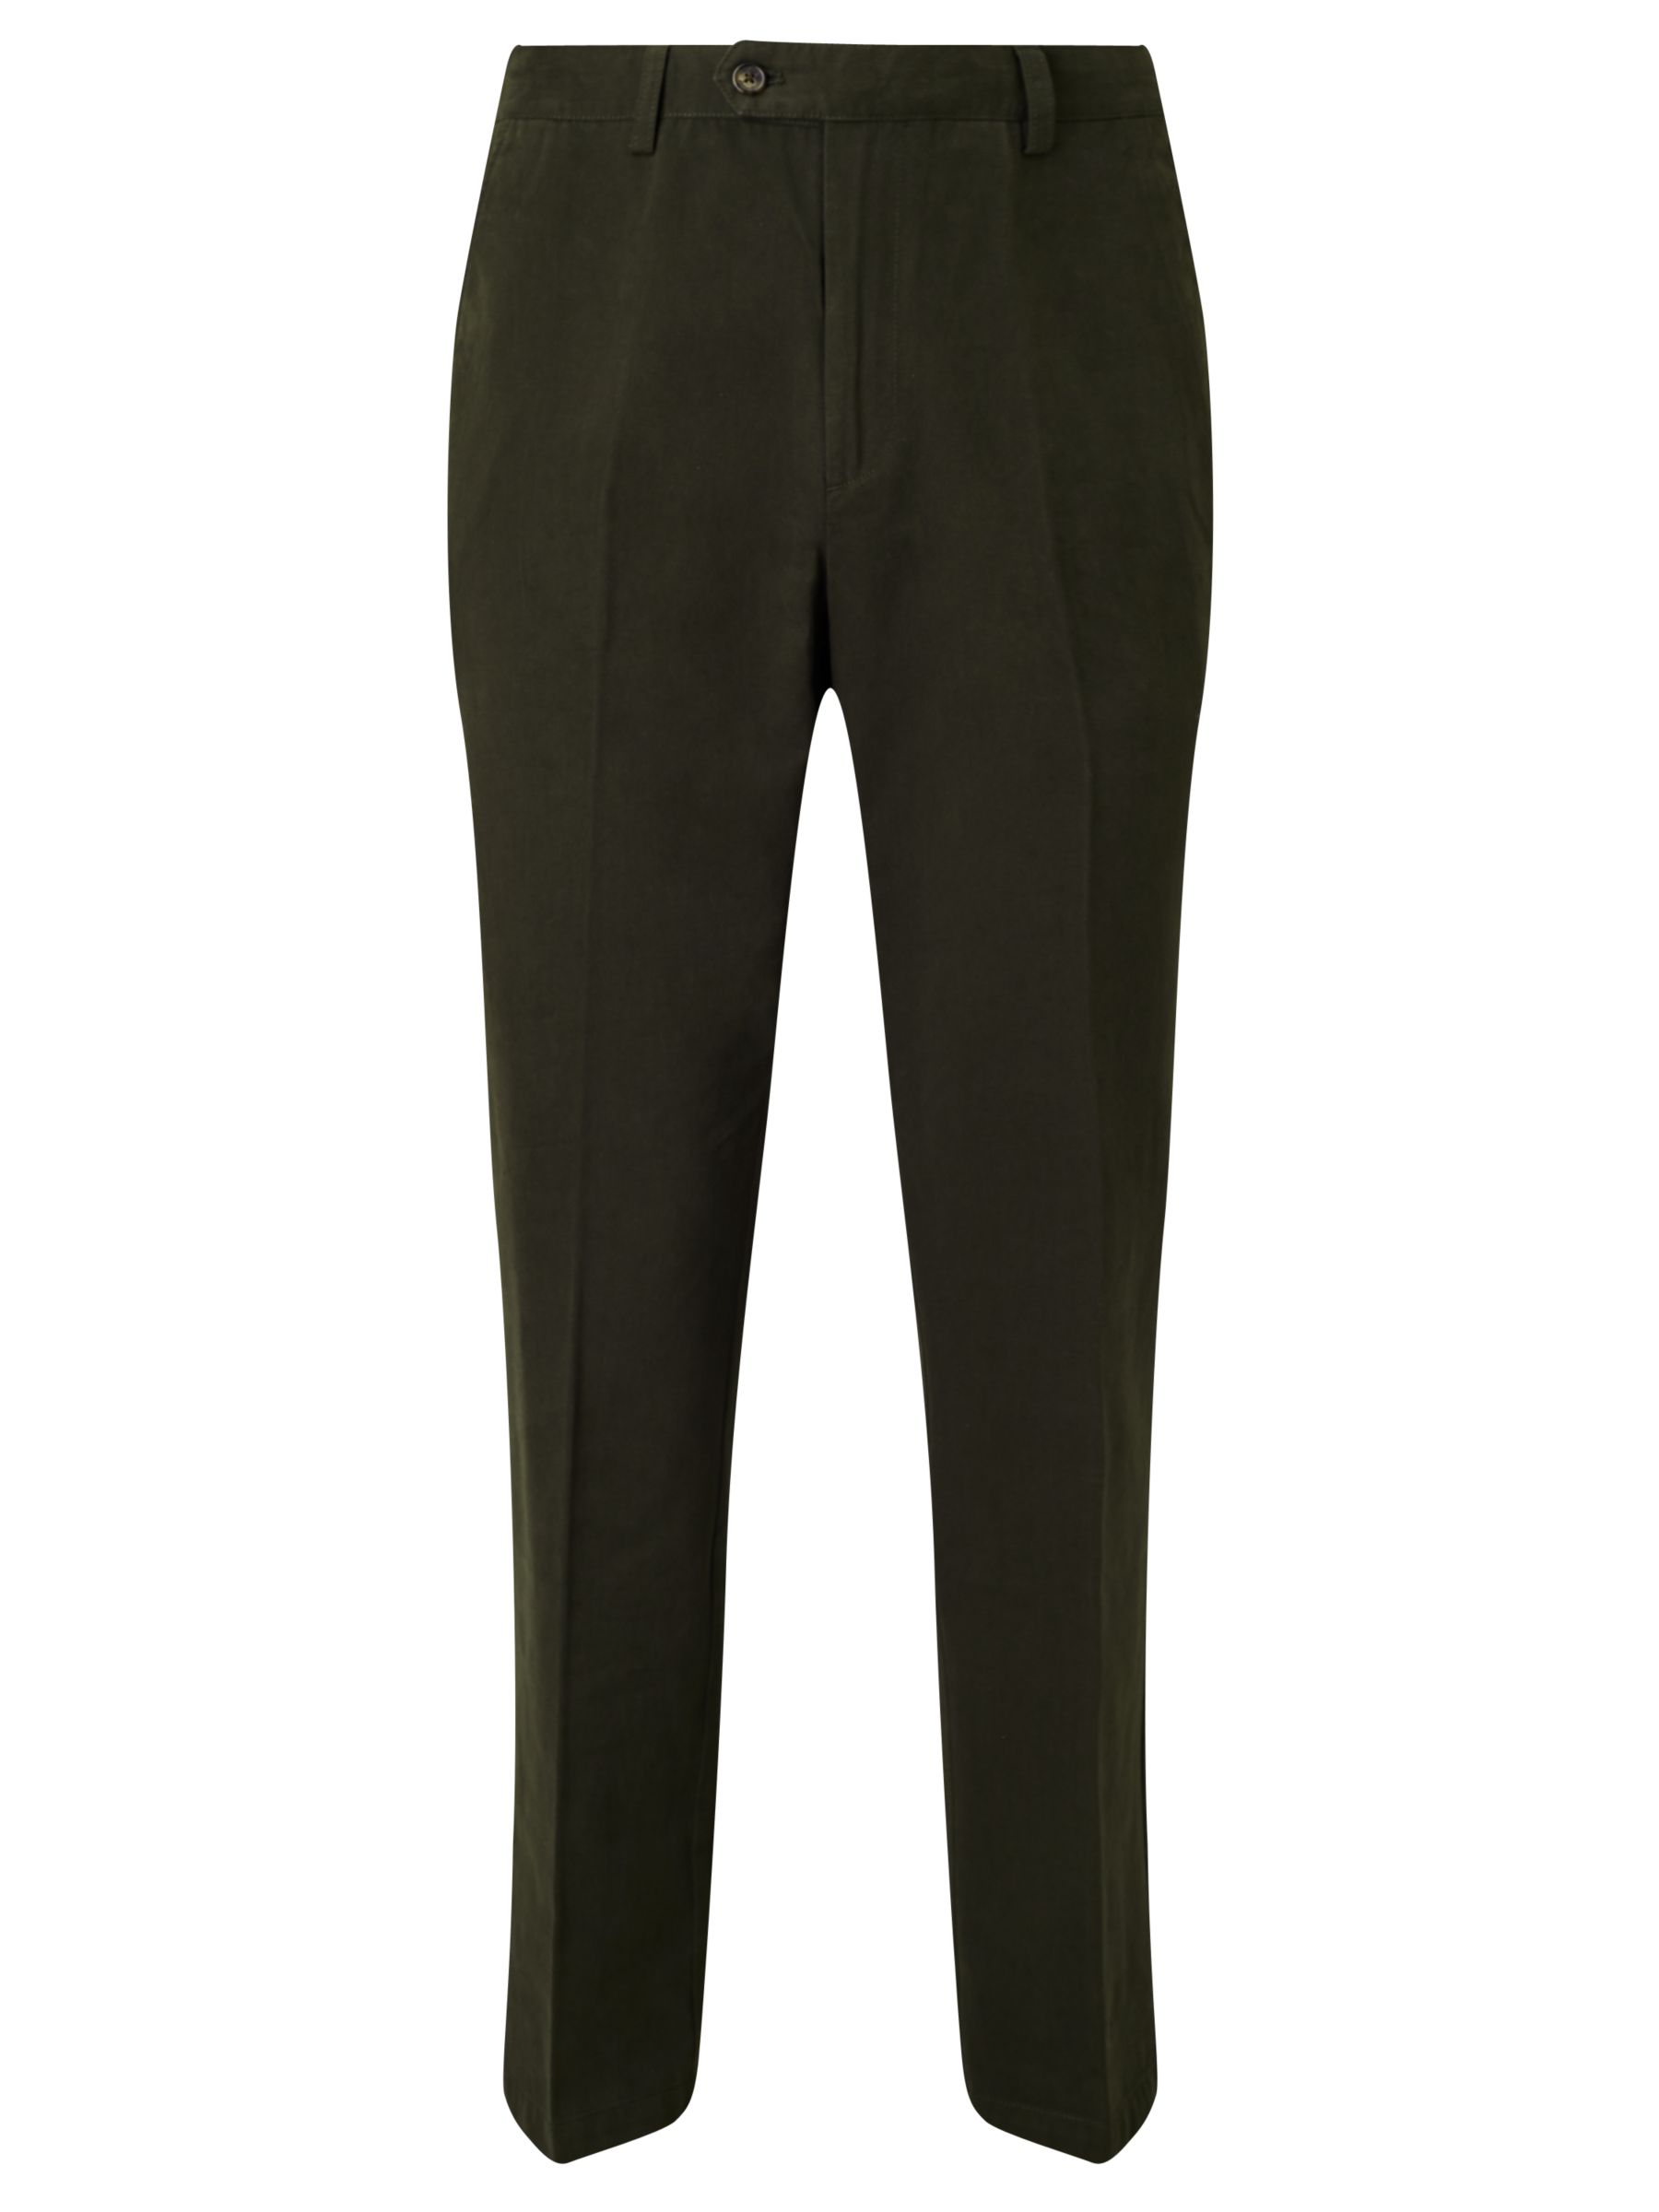 John Lewis & Partners Wrinkle Free Flat Front Trousers